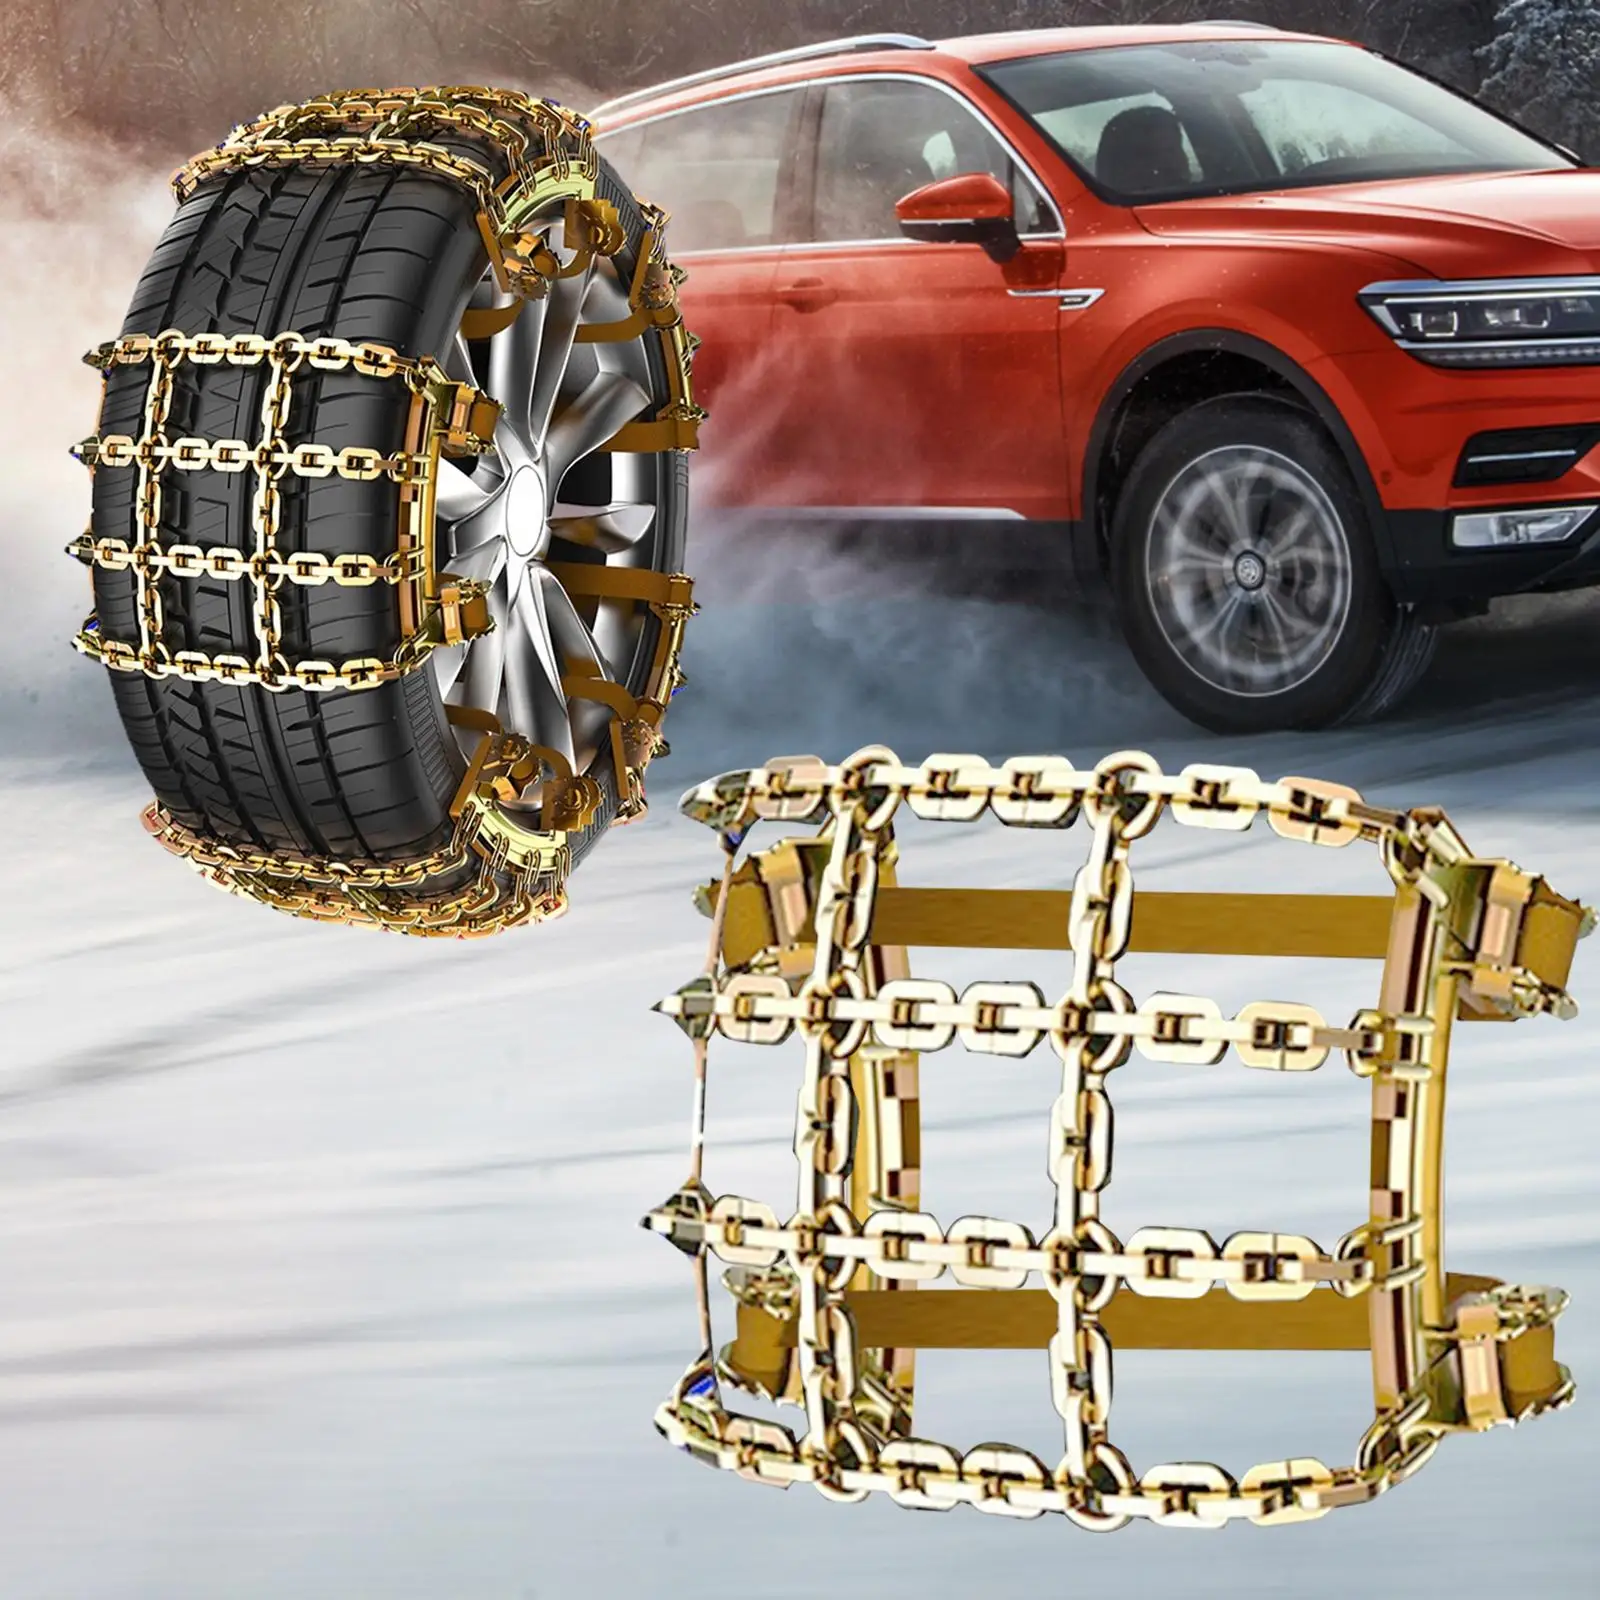 Snow Chain Automotive Accessories Reusable Thickening Chain Universal Anti Skid Snow Car Tire Chain for Suvs Cars Trucks